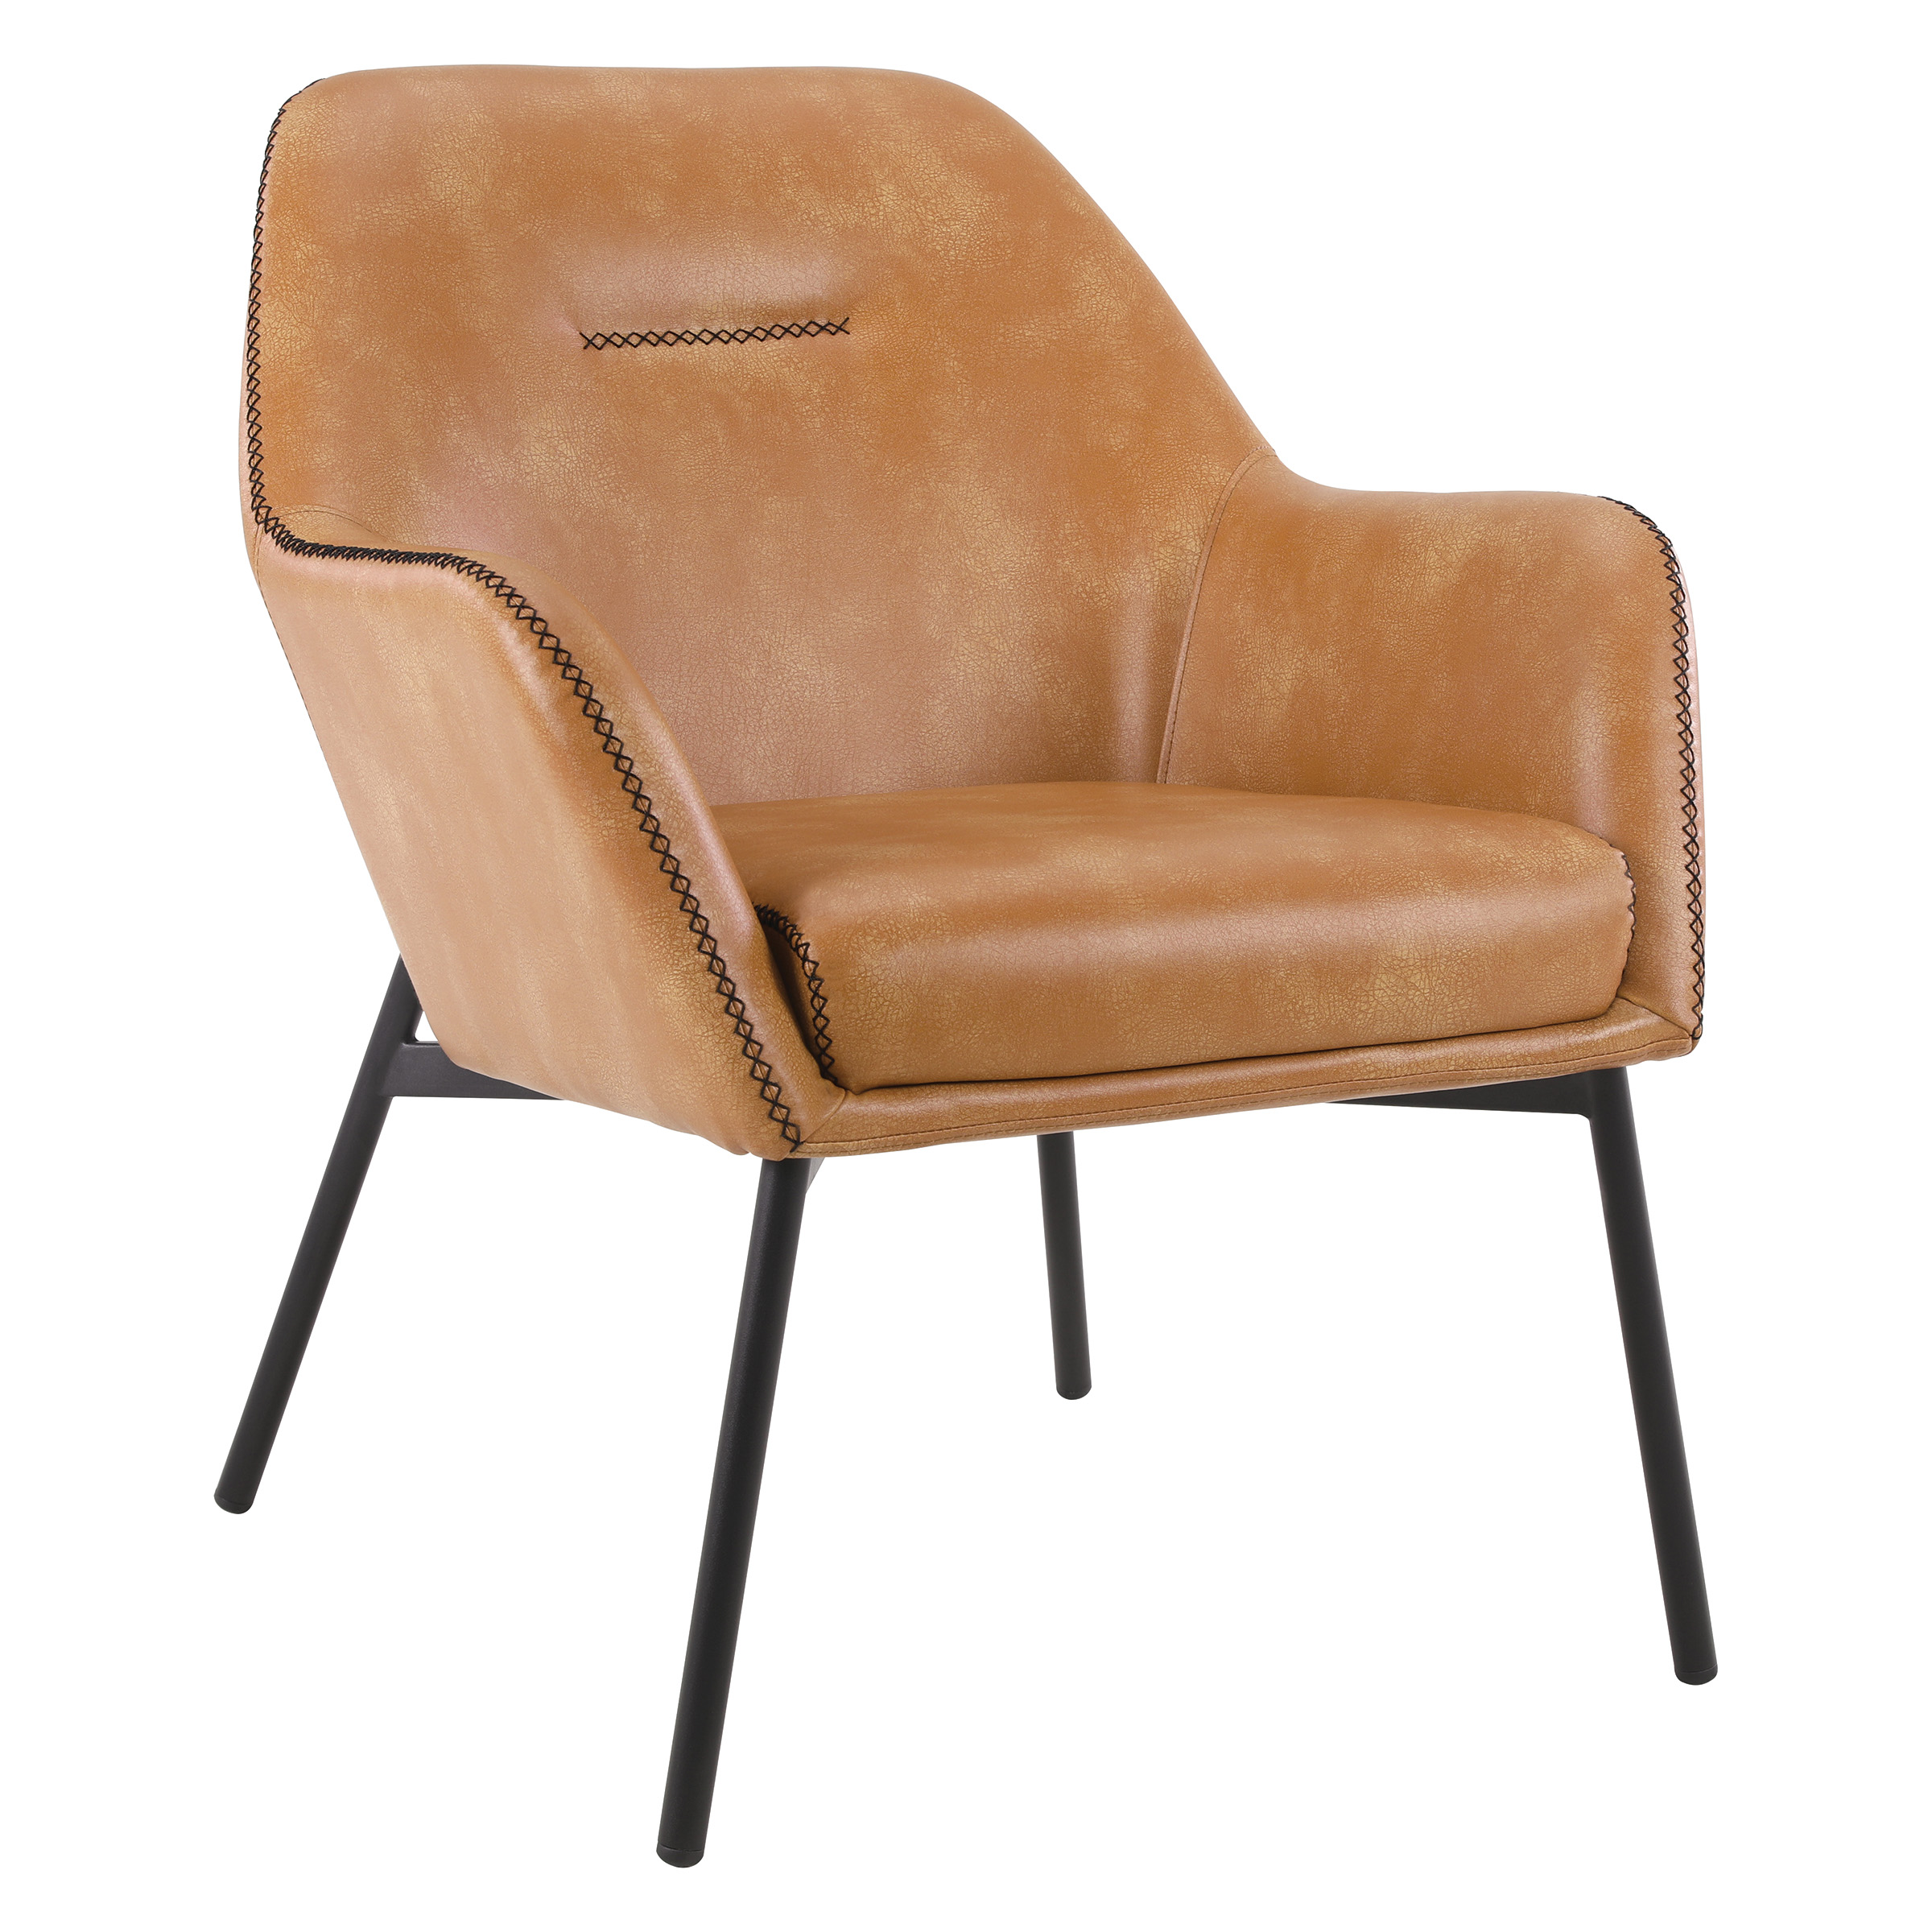 Brooks Accent Chair in Sand Brown Faux Leather with Black Stitch and Black Legs - image 1 of 9